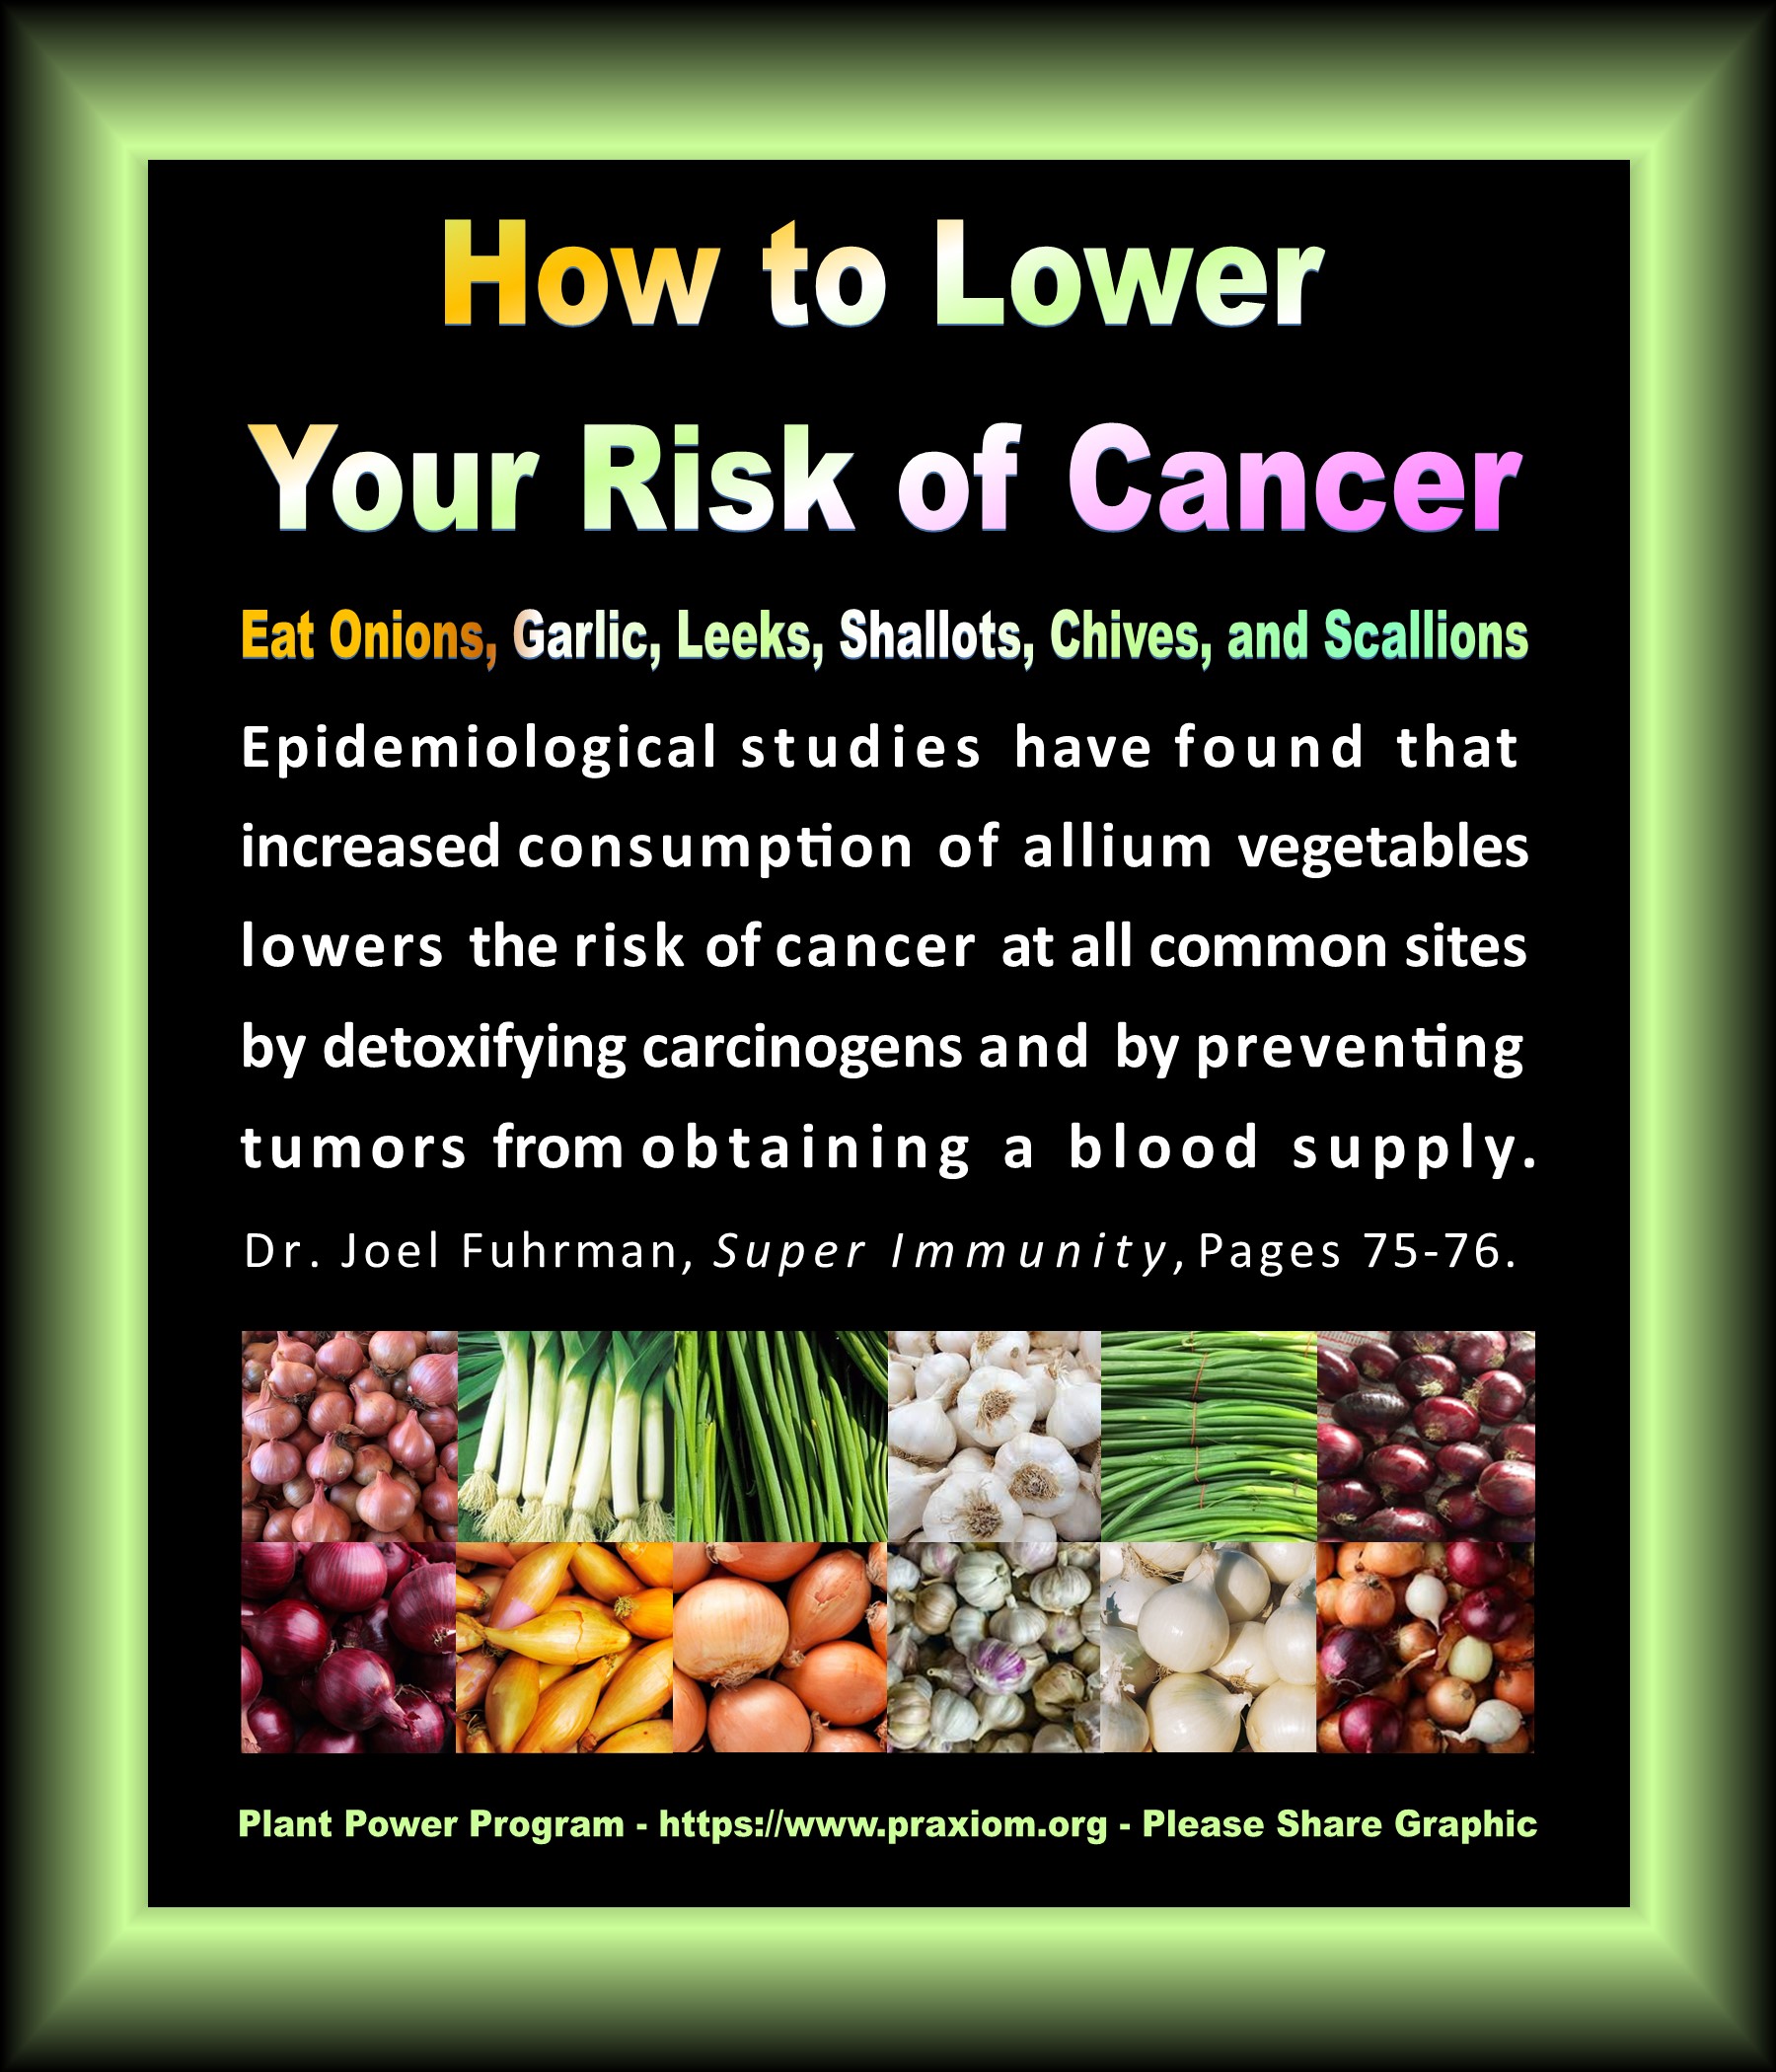 How to Lower Your Risk of Cancer - Dr. Joel Fuhrman